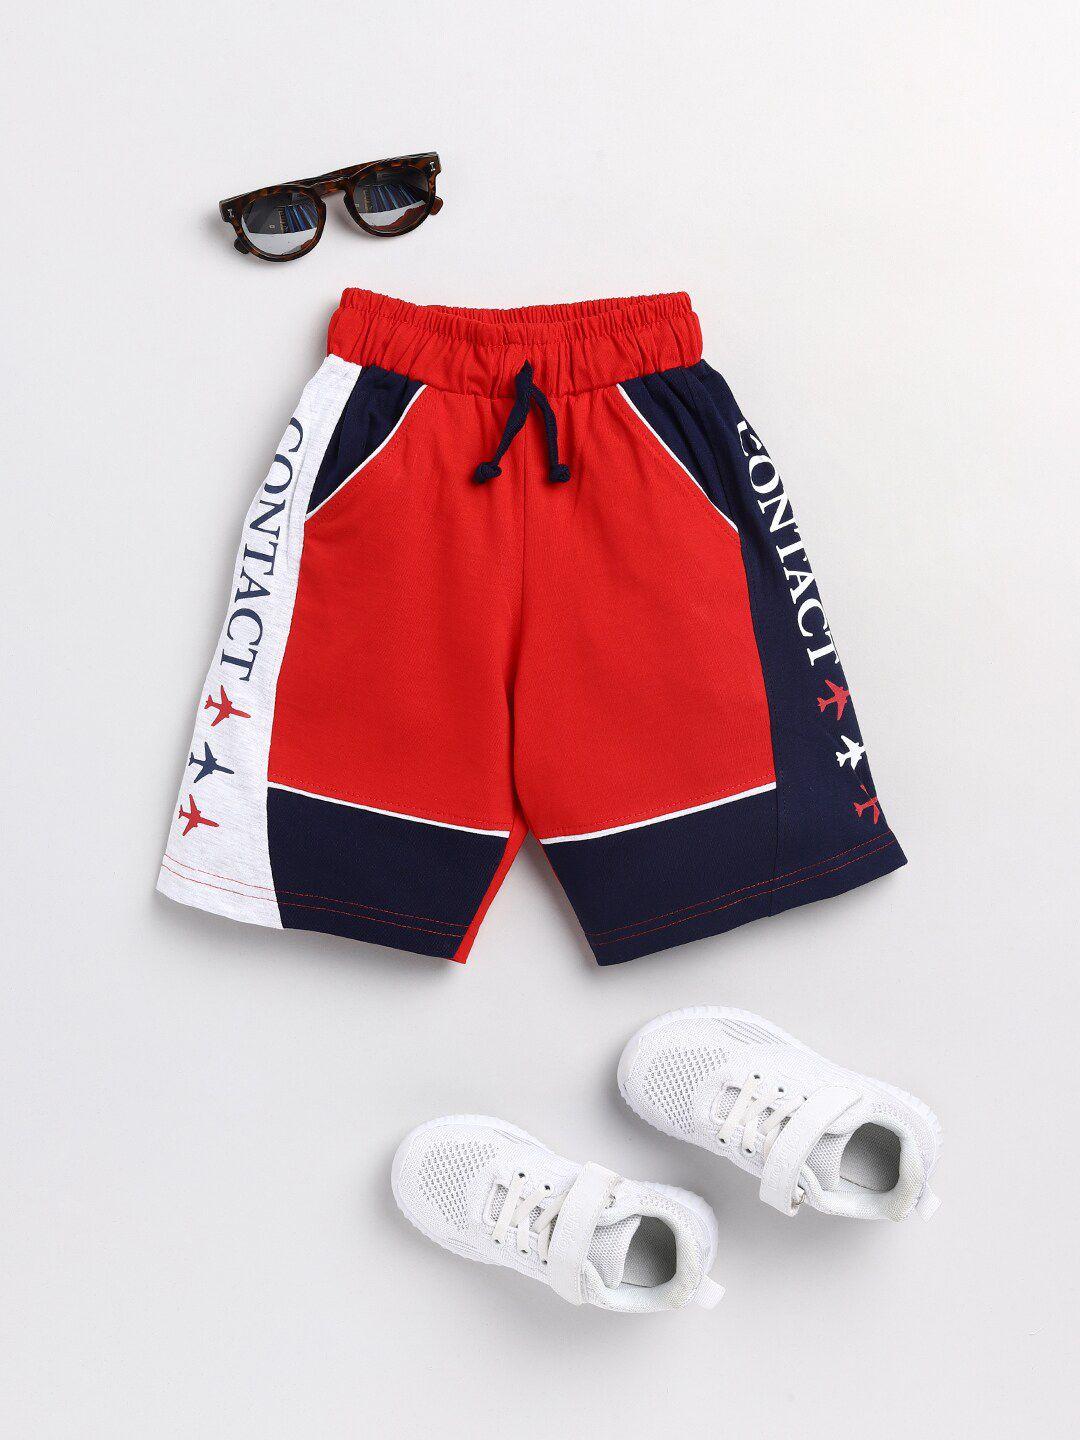 todd n teen boys red typography printed cotton shorts